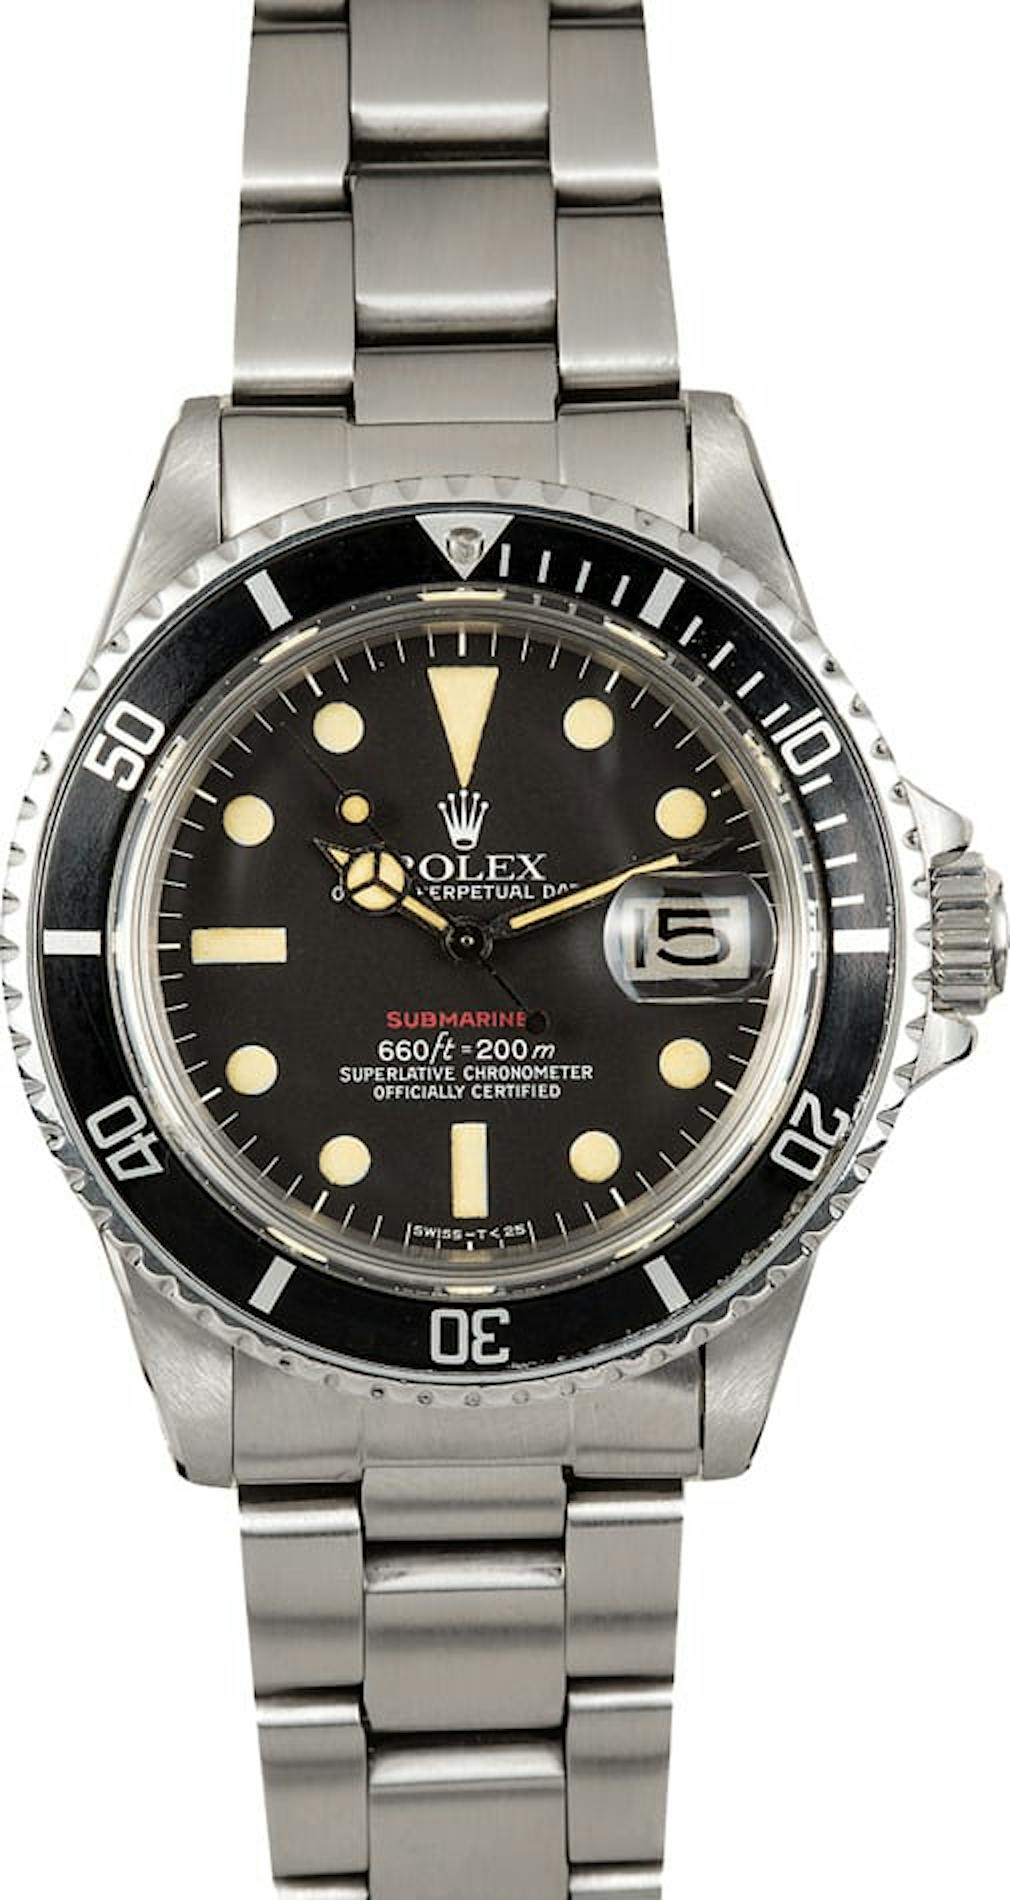 Pre-owned Rolex Submariner 1680 Vintage Watch